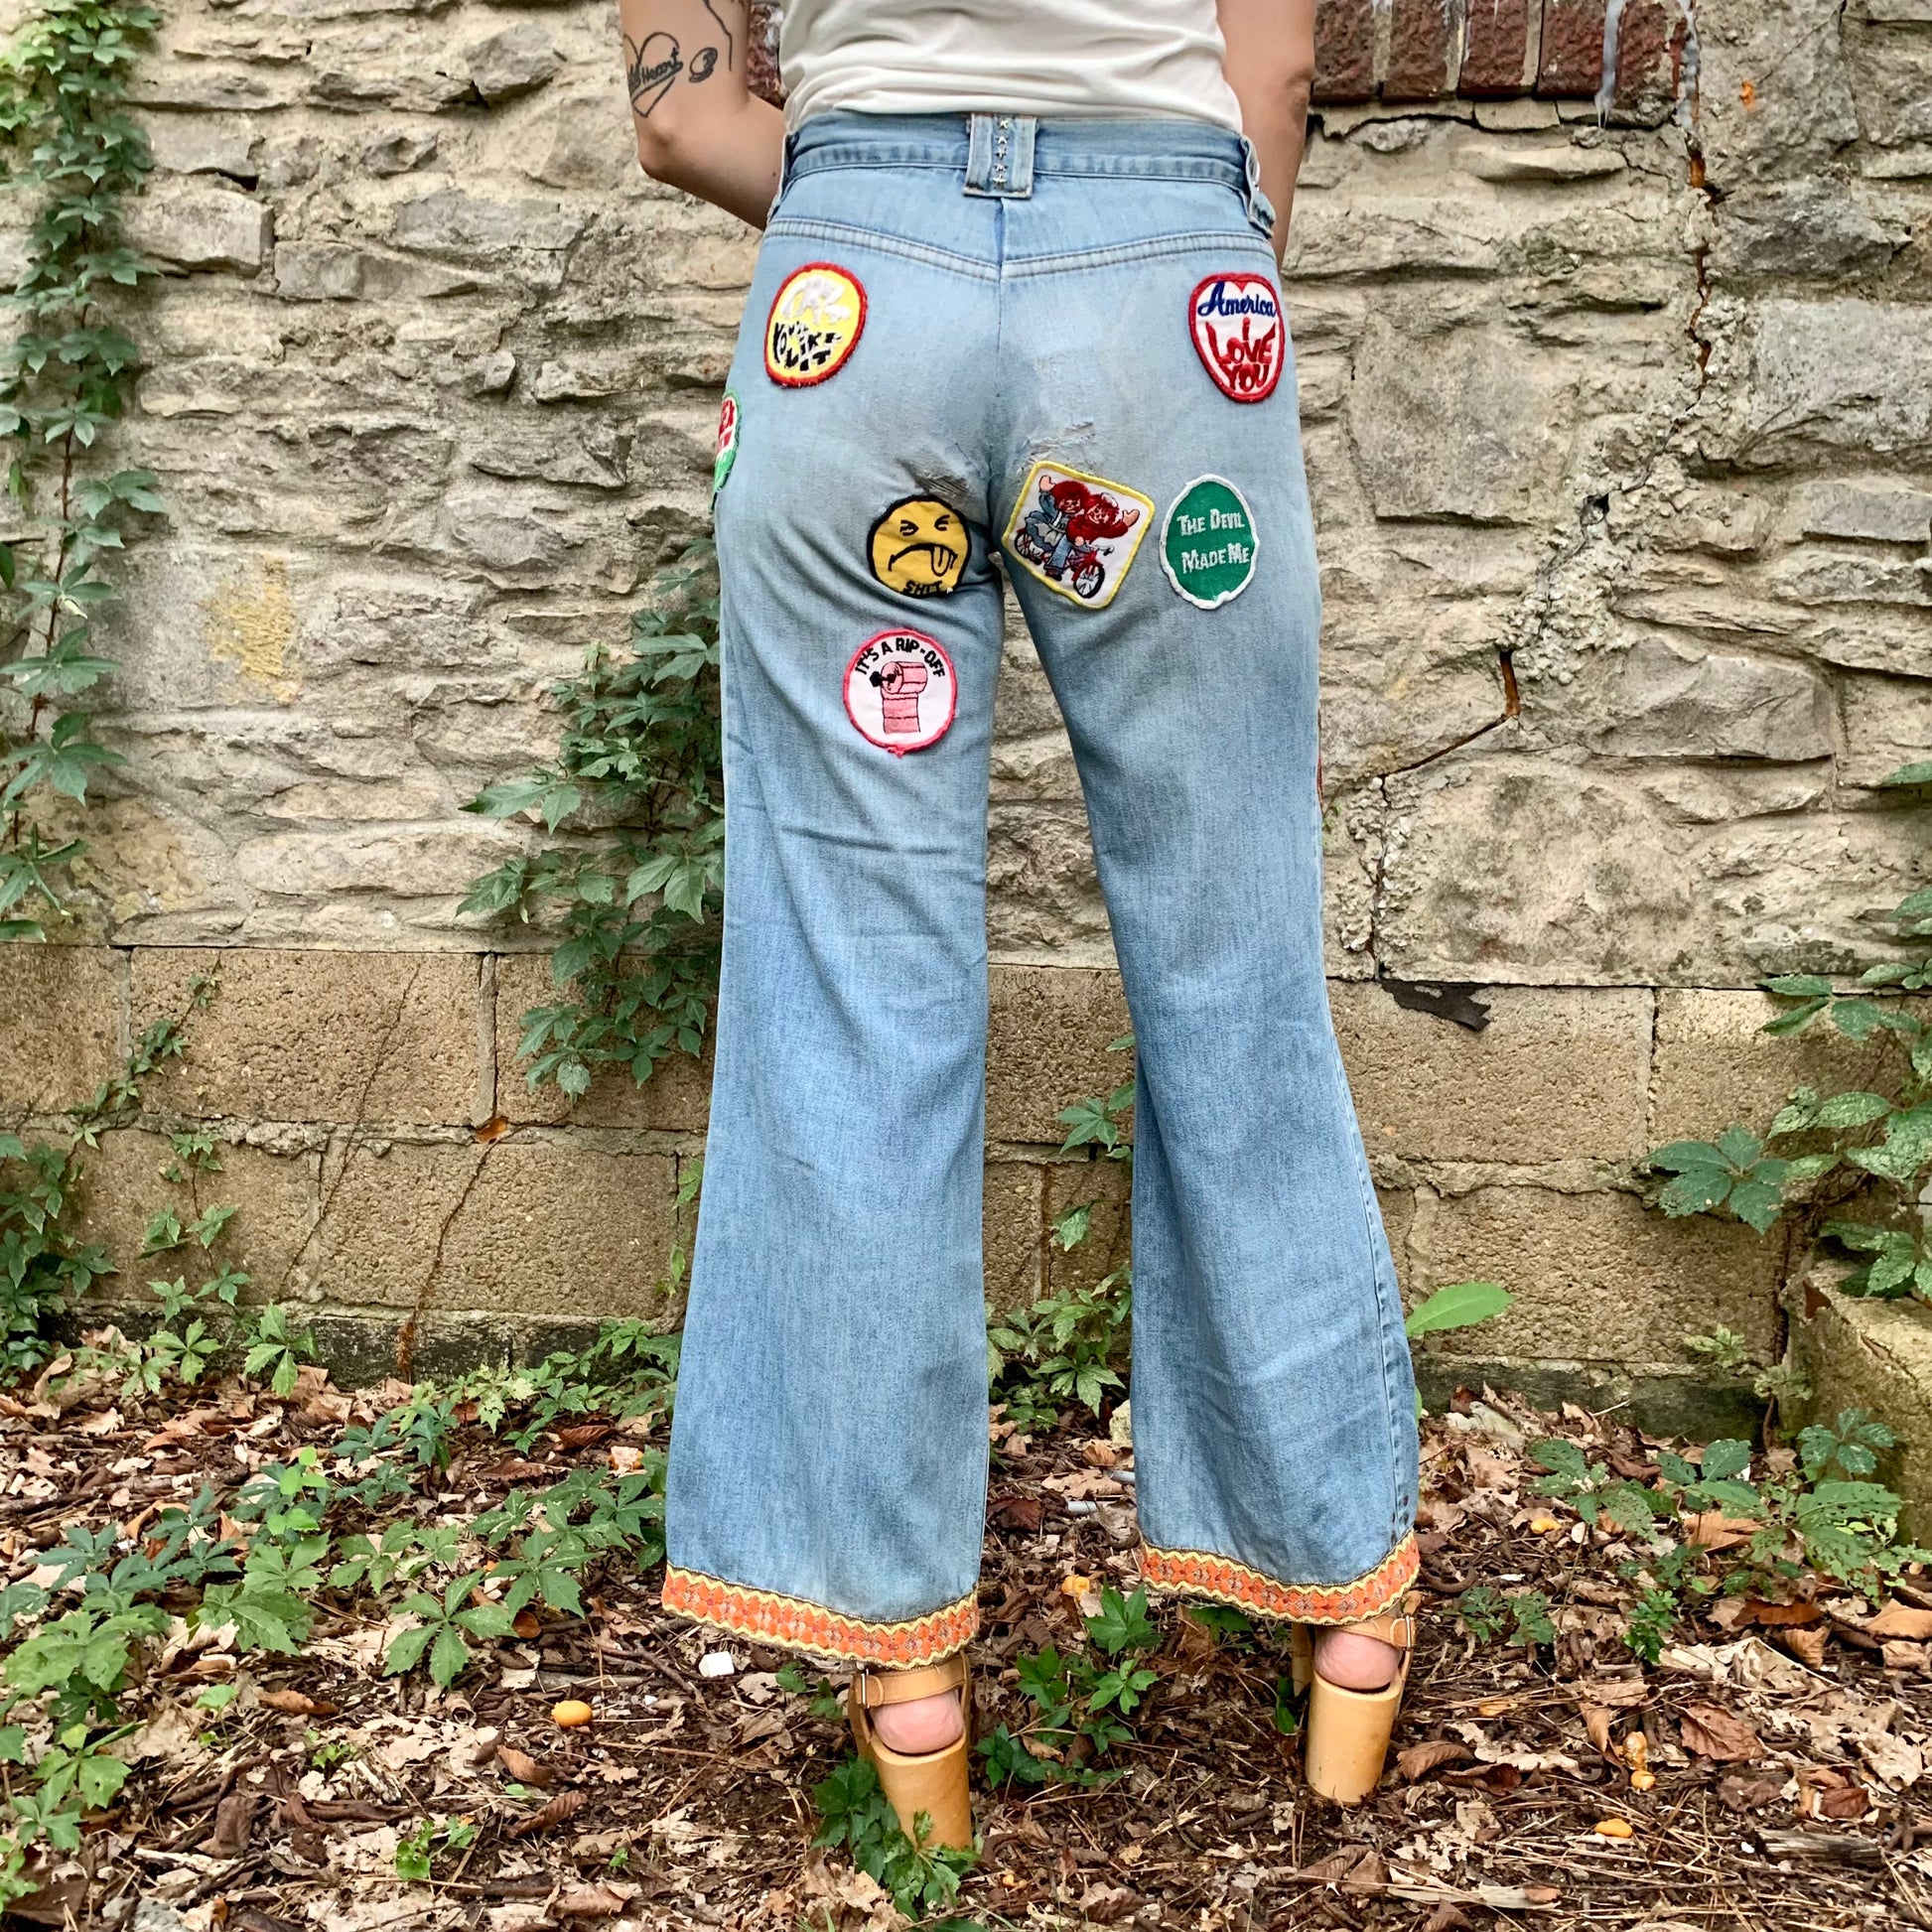 Buttoned Hem Ripped Flare Jeans - Retro, Indie and Unique Fashion